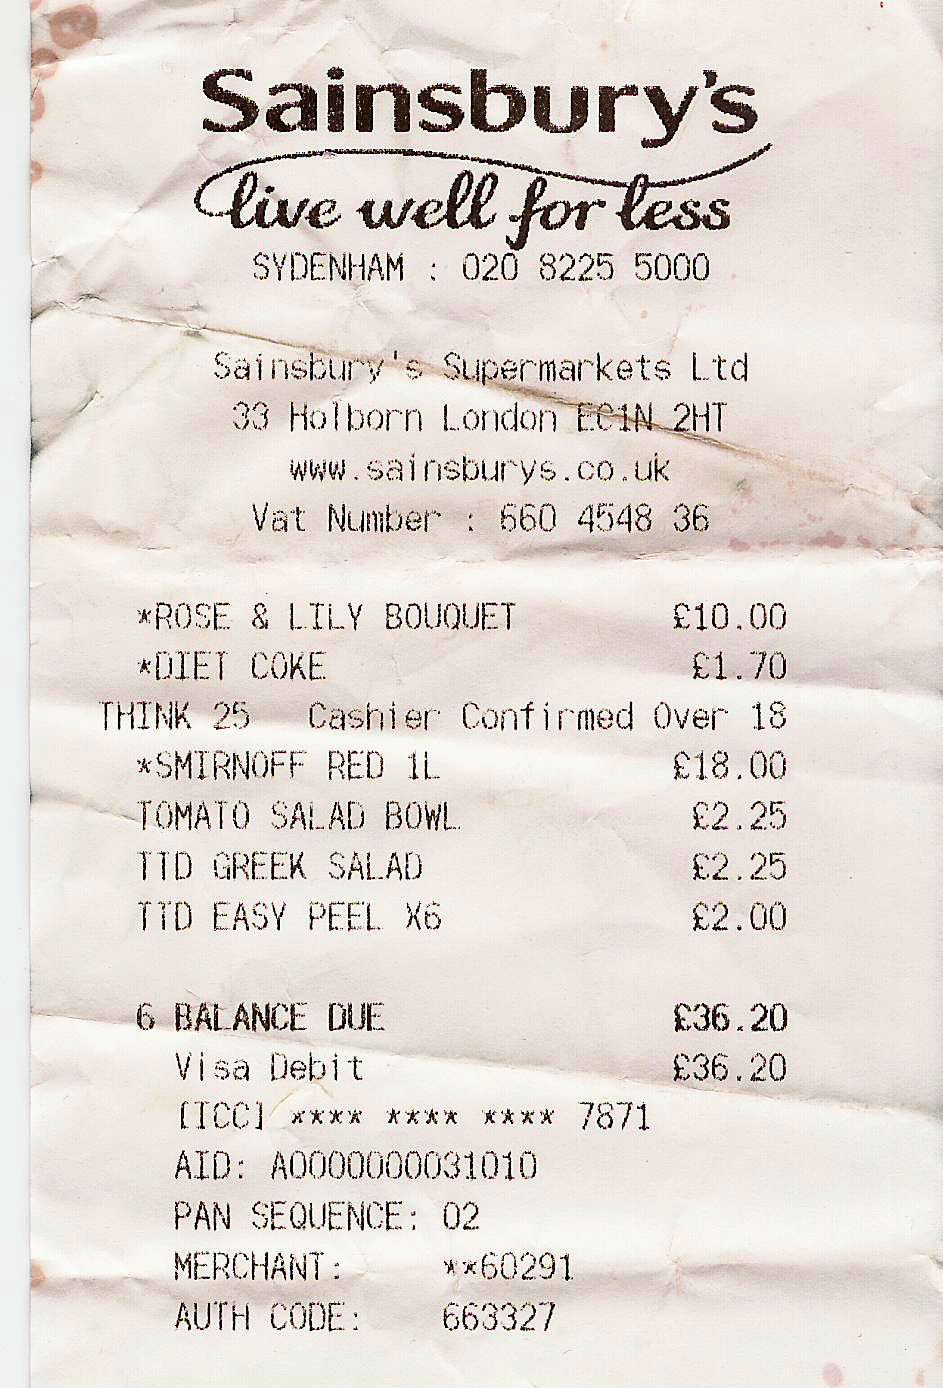 receipt from a year and 12 days ago